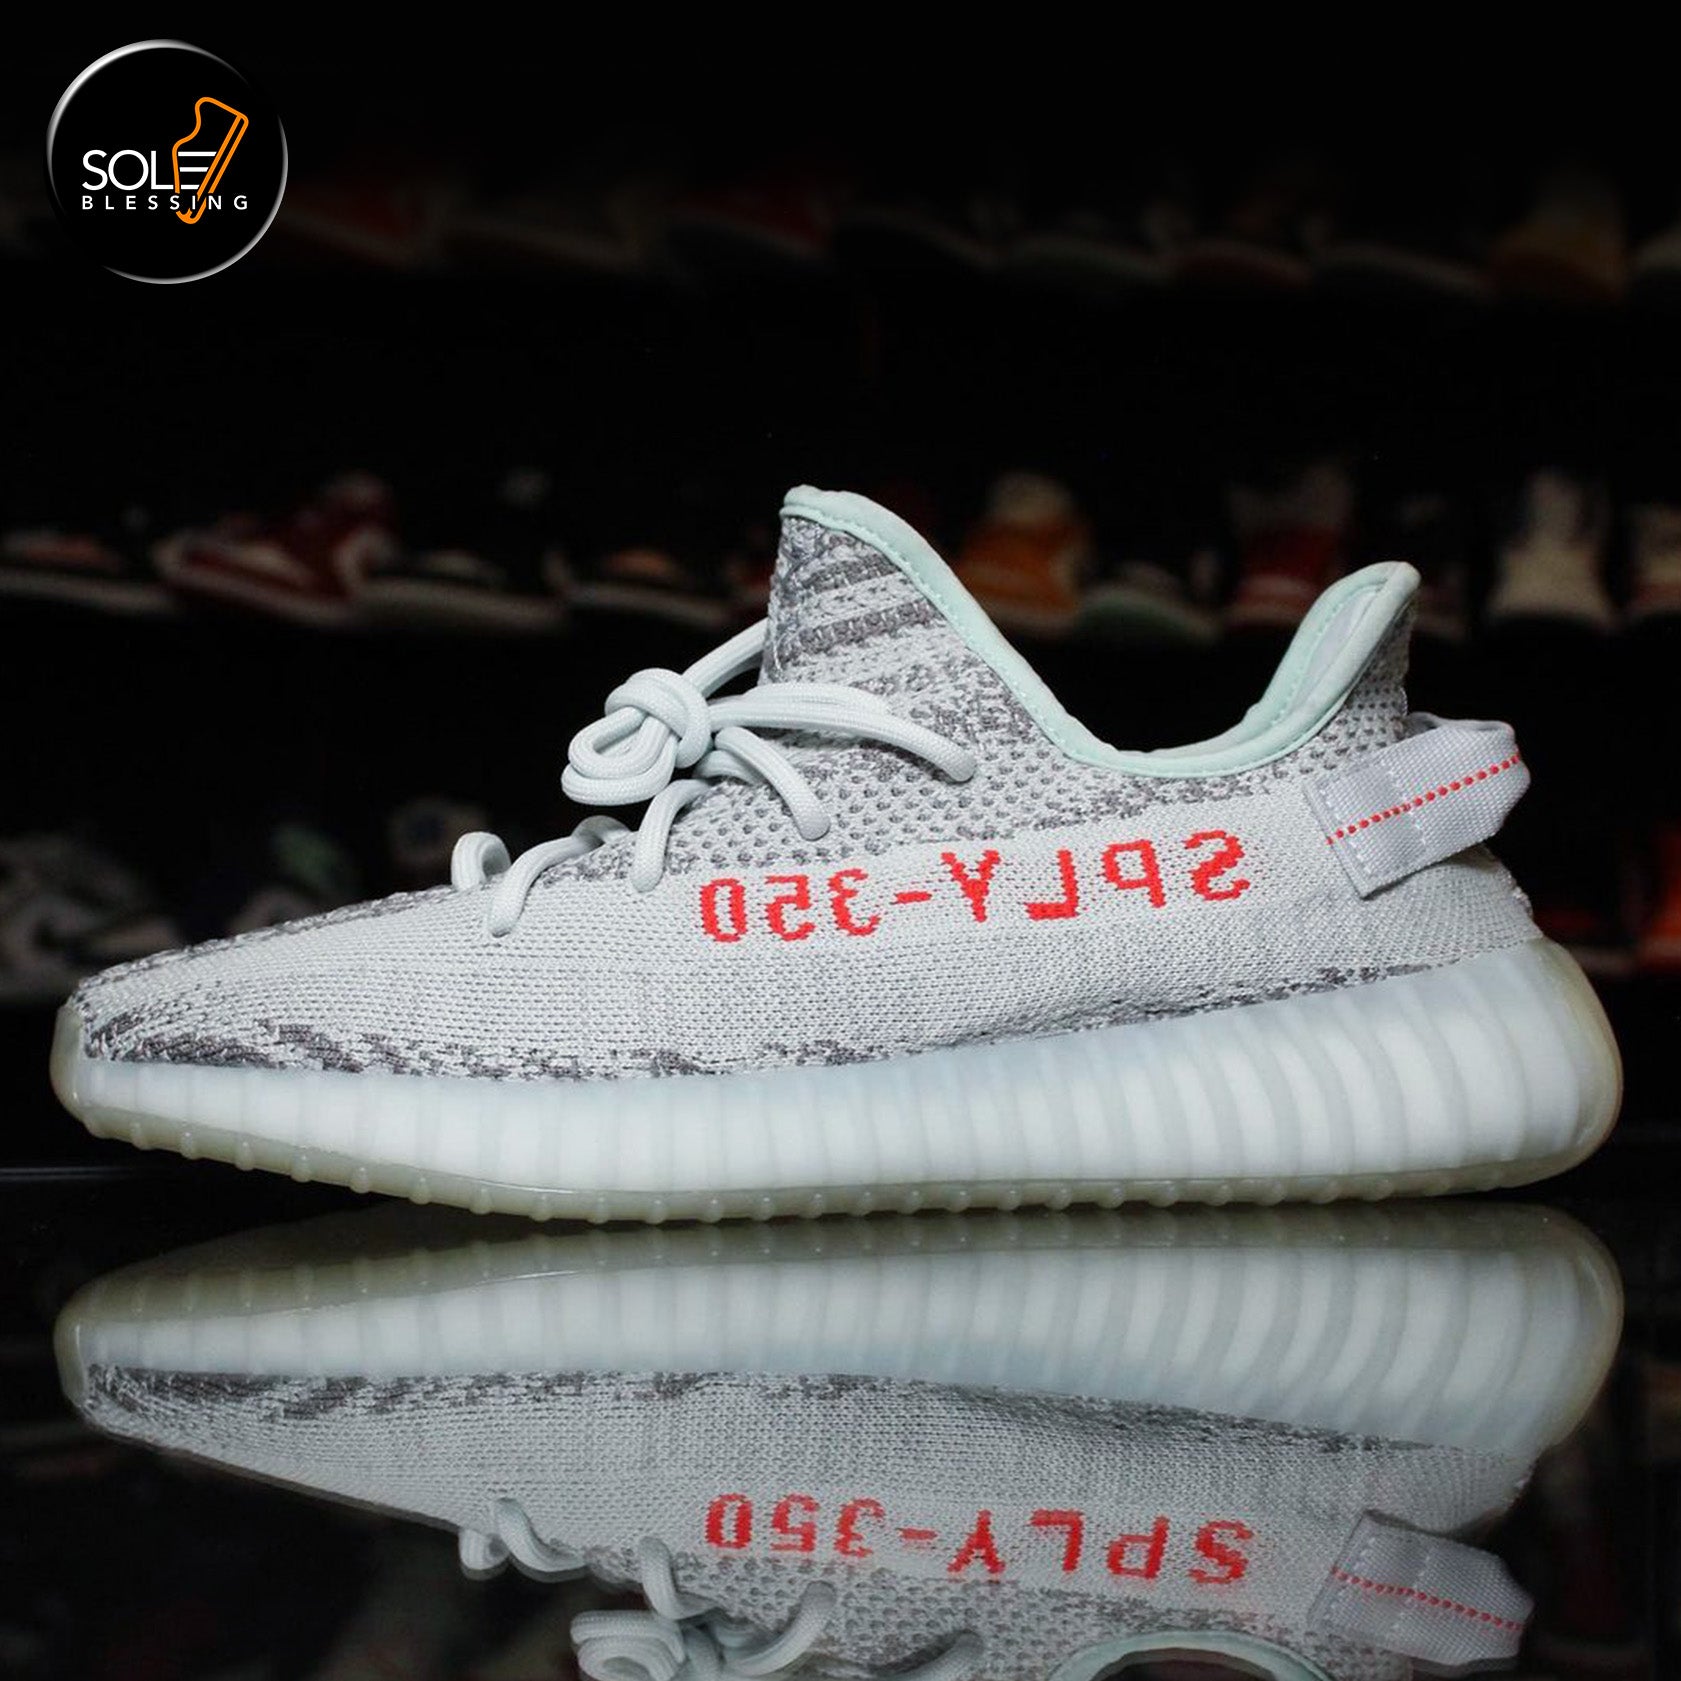 Yeezy Boost 350 V2 Blue Tint – SOLEBLESSING